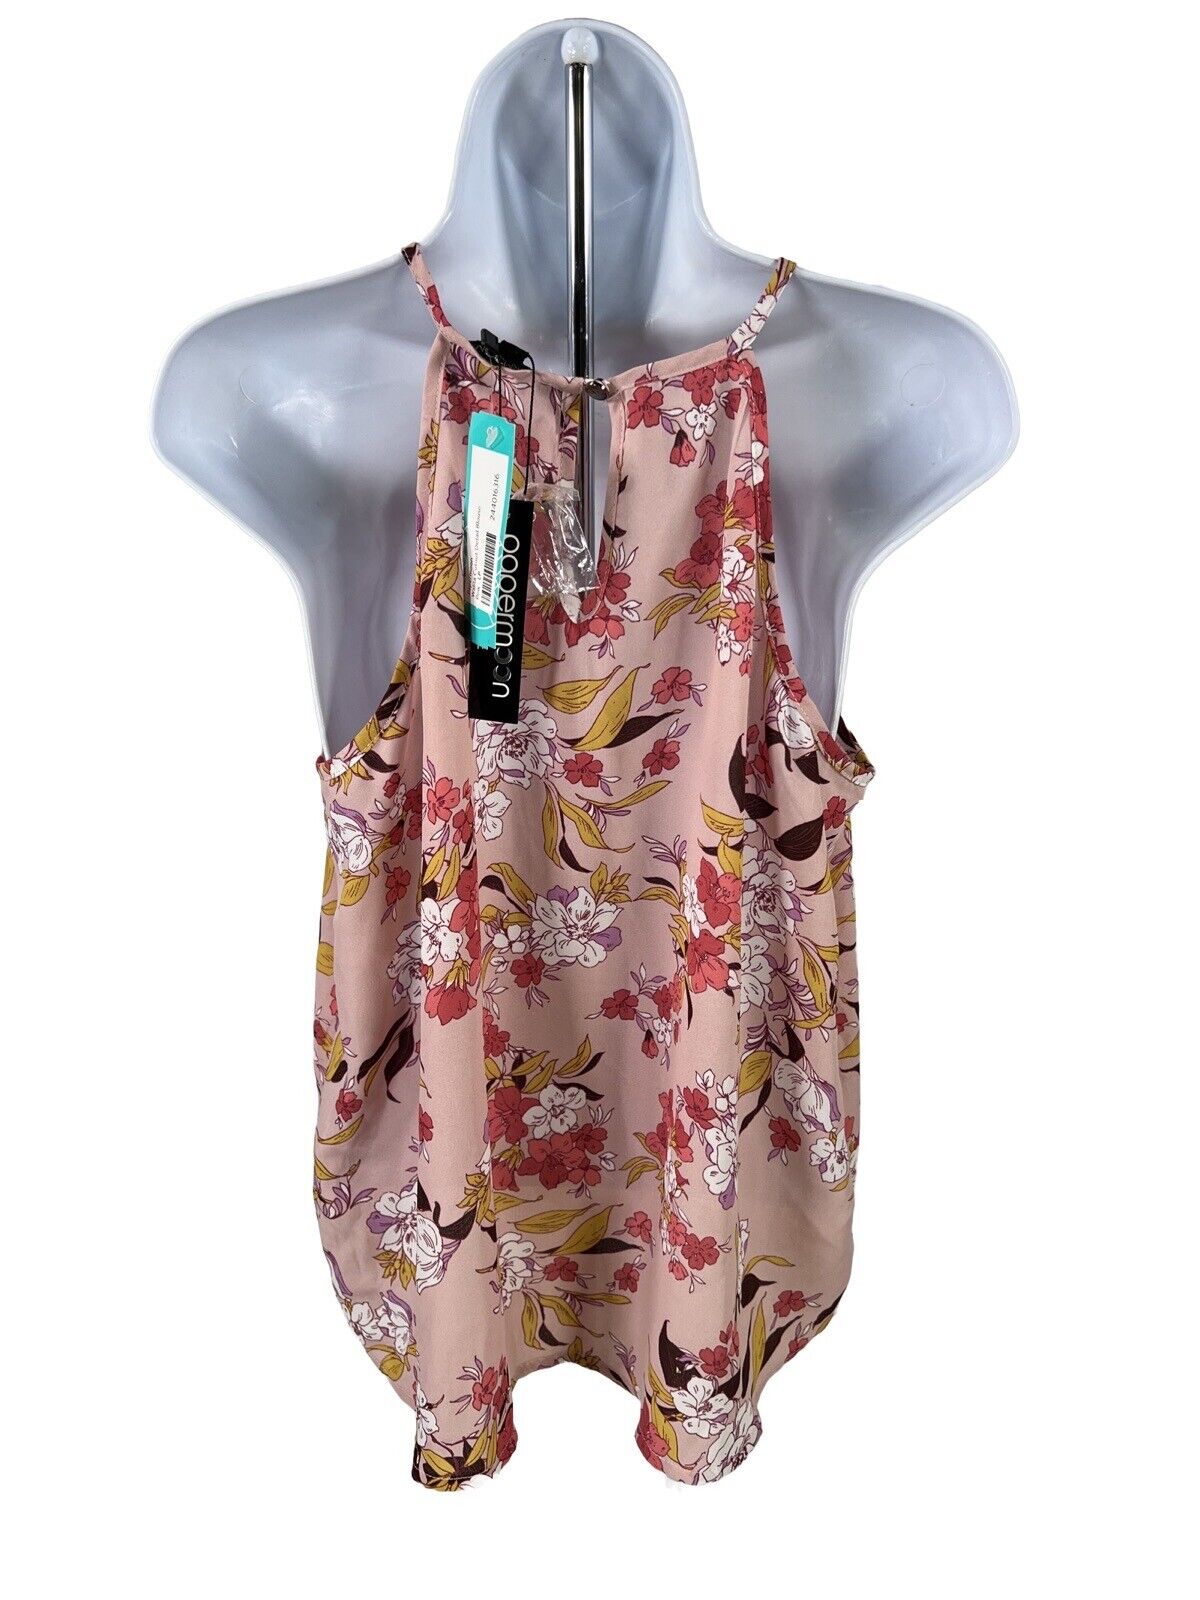 NEW Papermoon Women's Pink Floral Sleeveless Top - Petite L